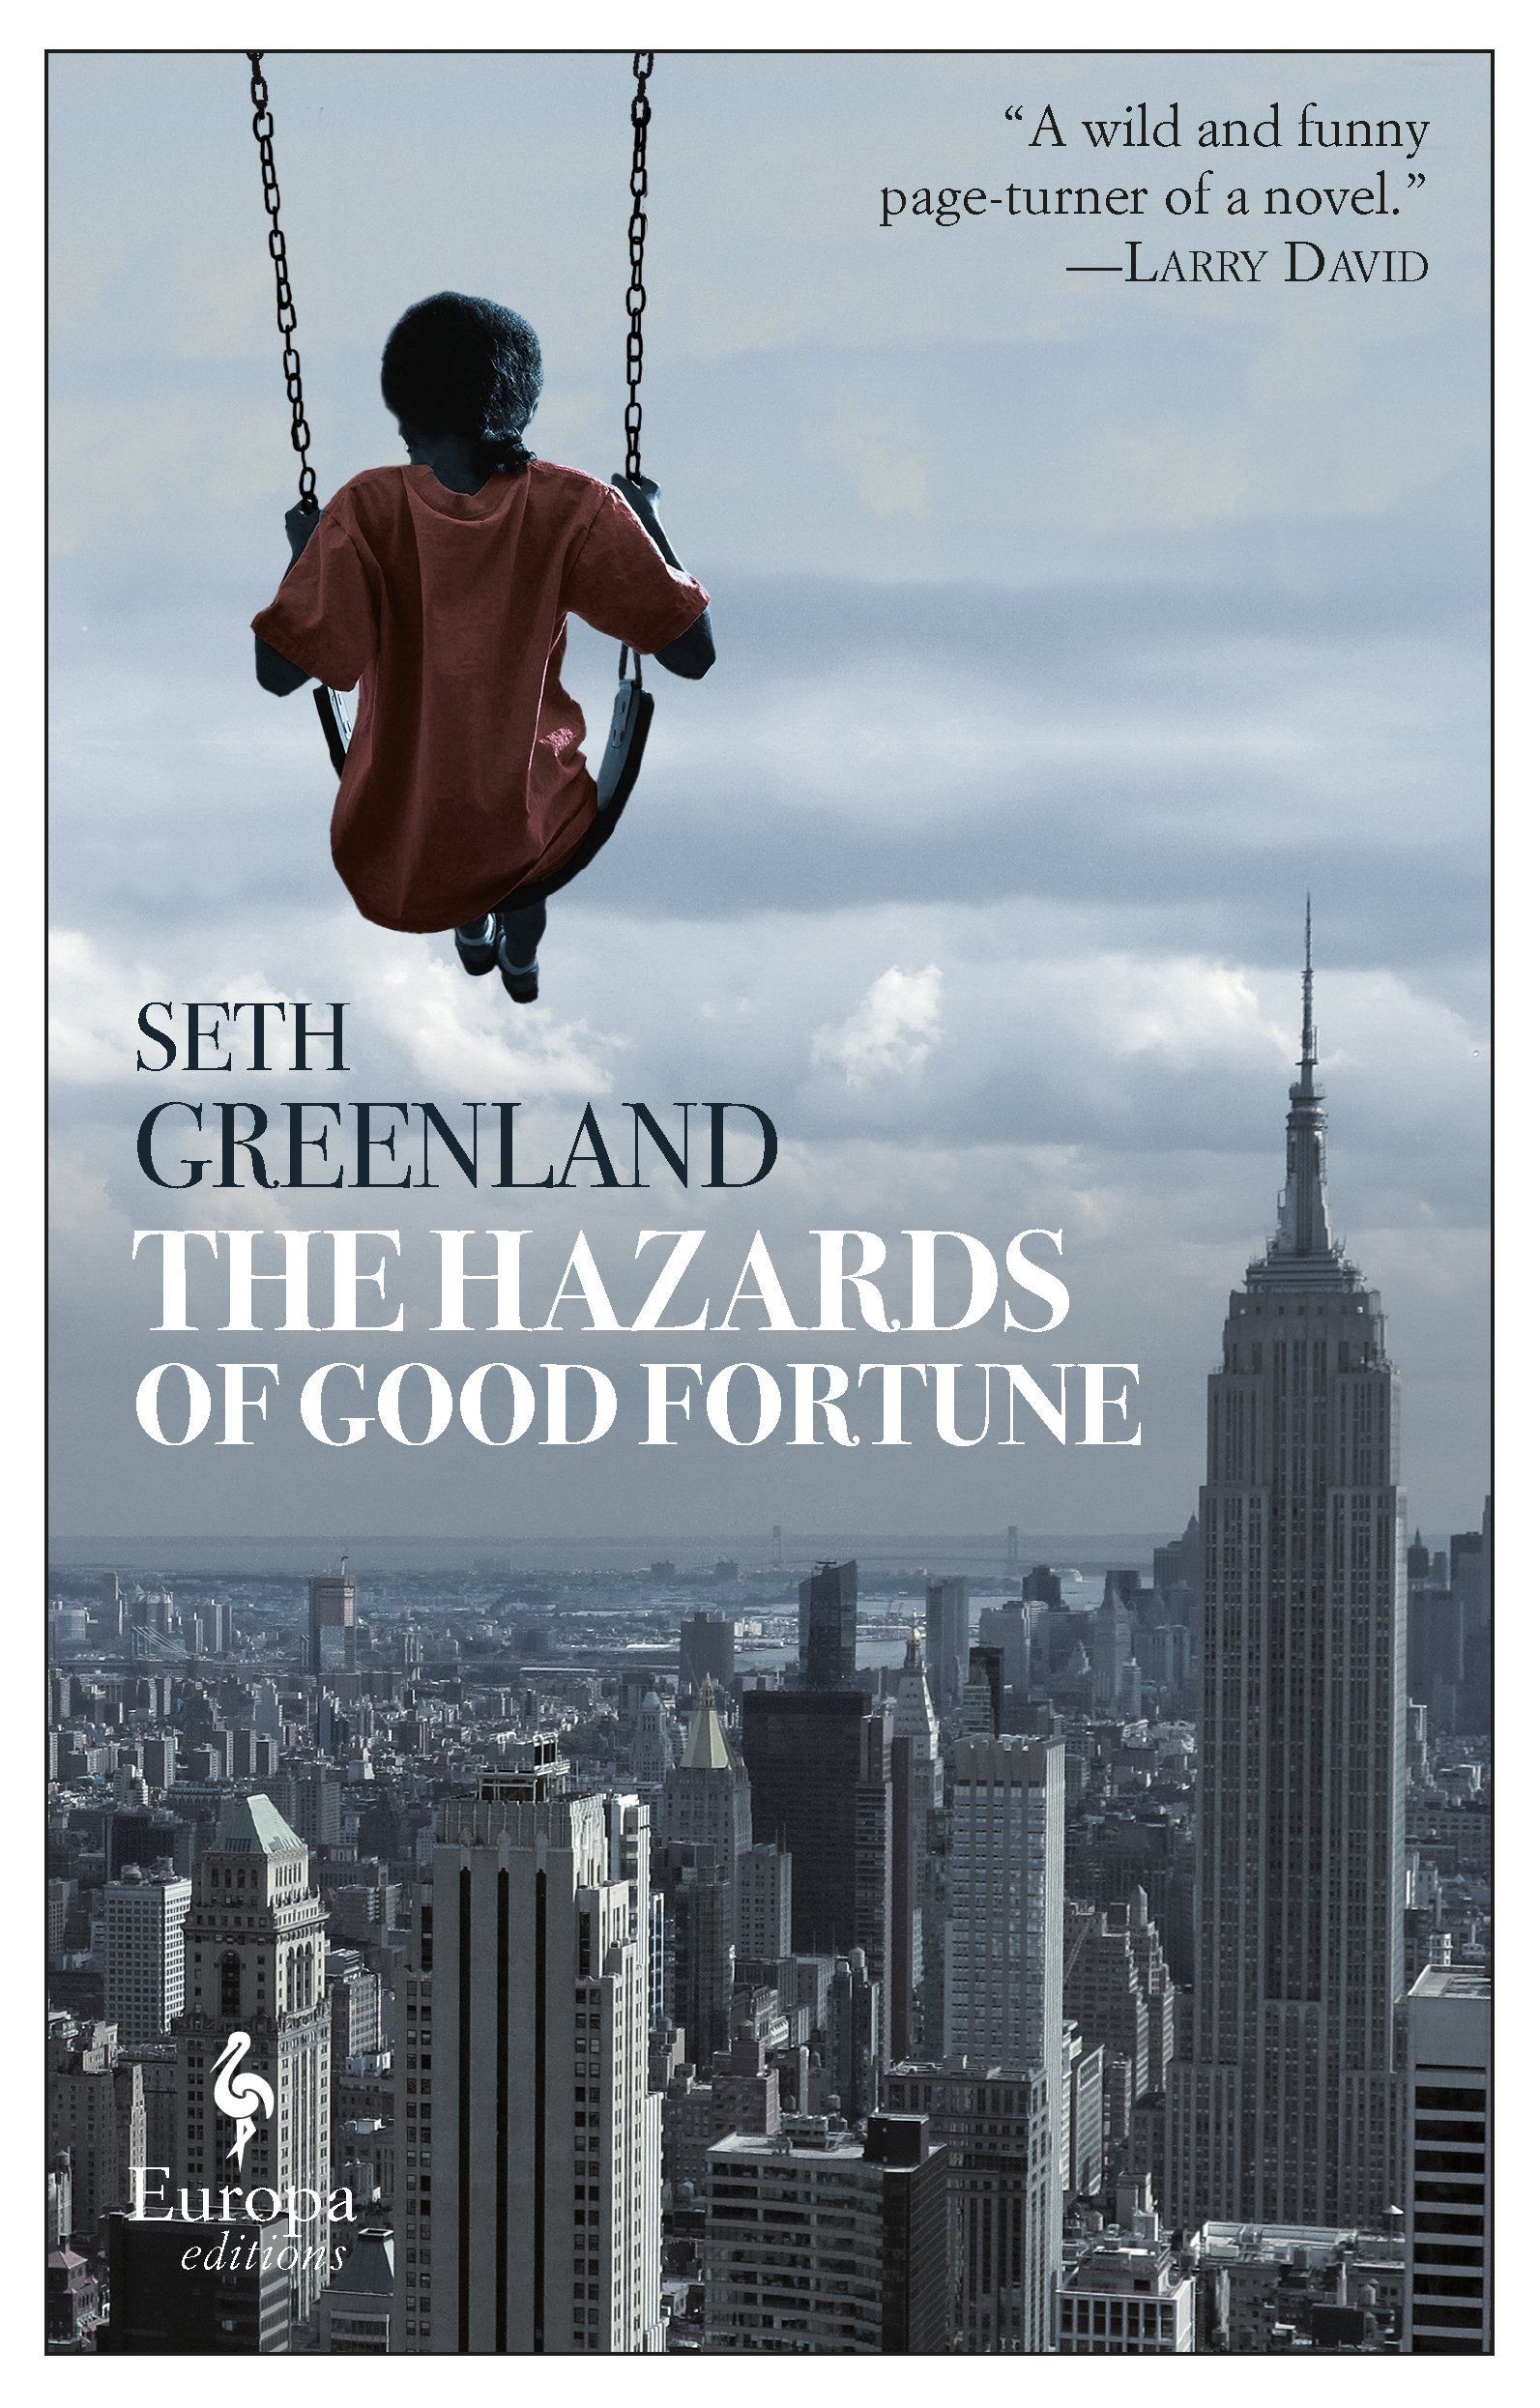 The Modern American Dilemma: Seth Greenland’s “The Hazards of Good Fortune”